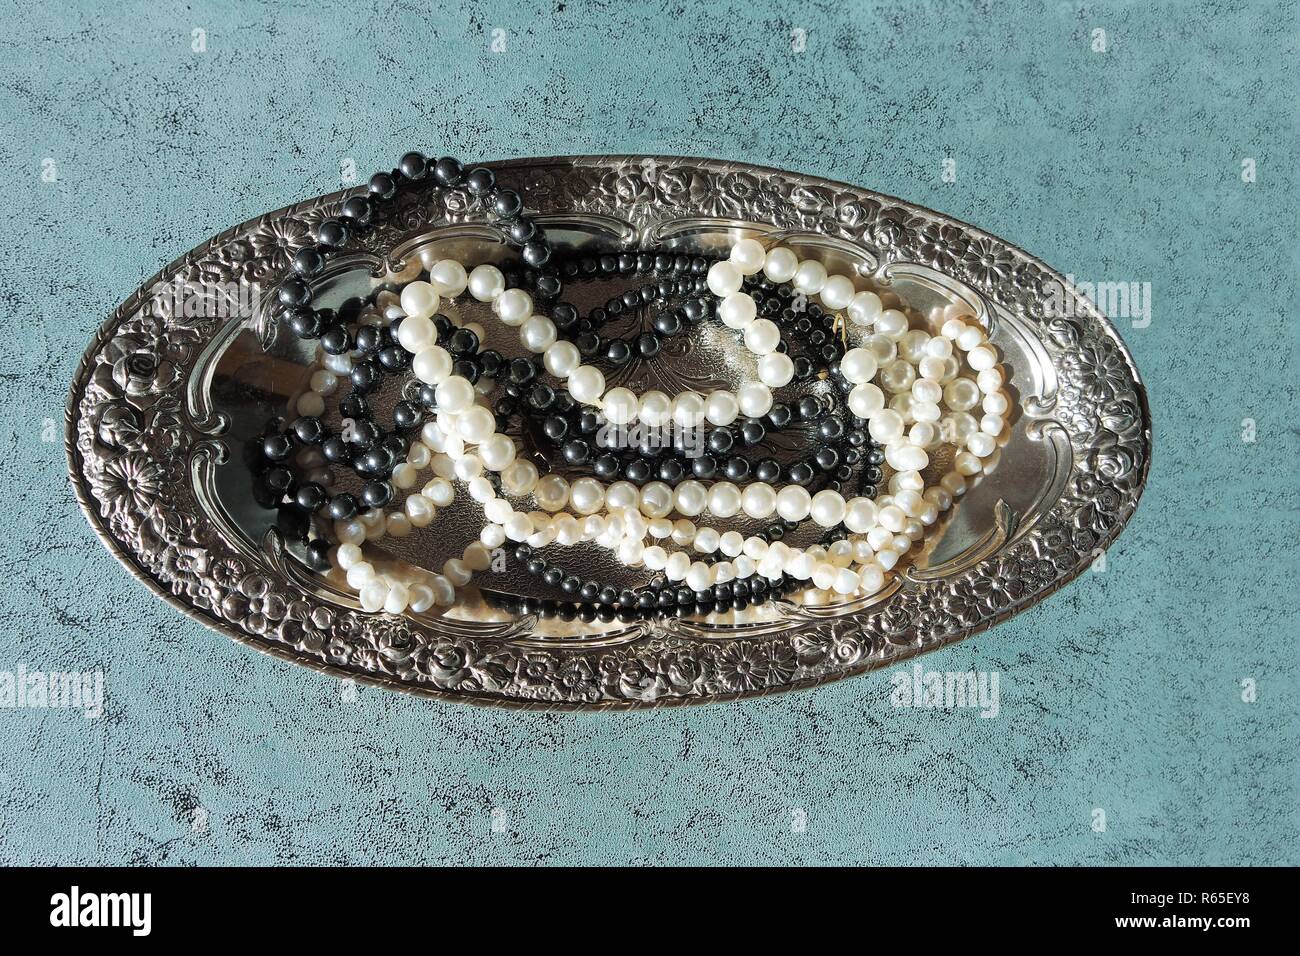 pearls on a silver tray Stock Photo